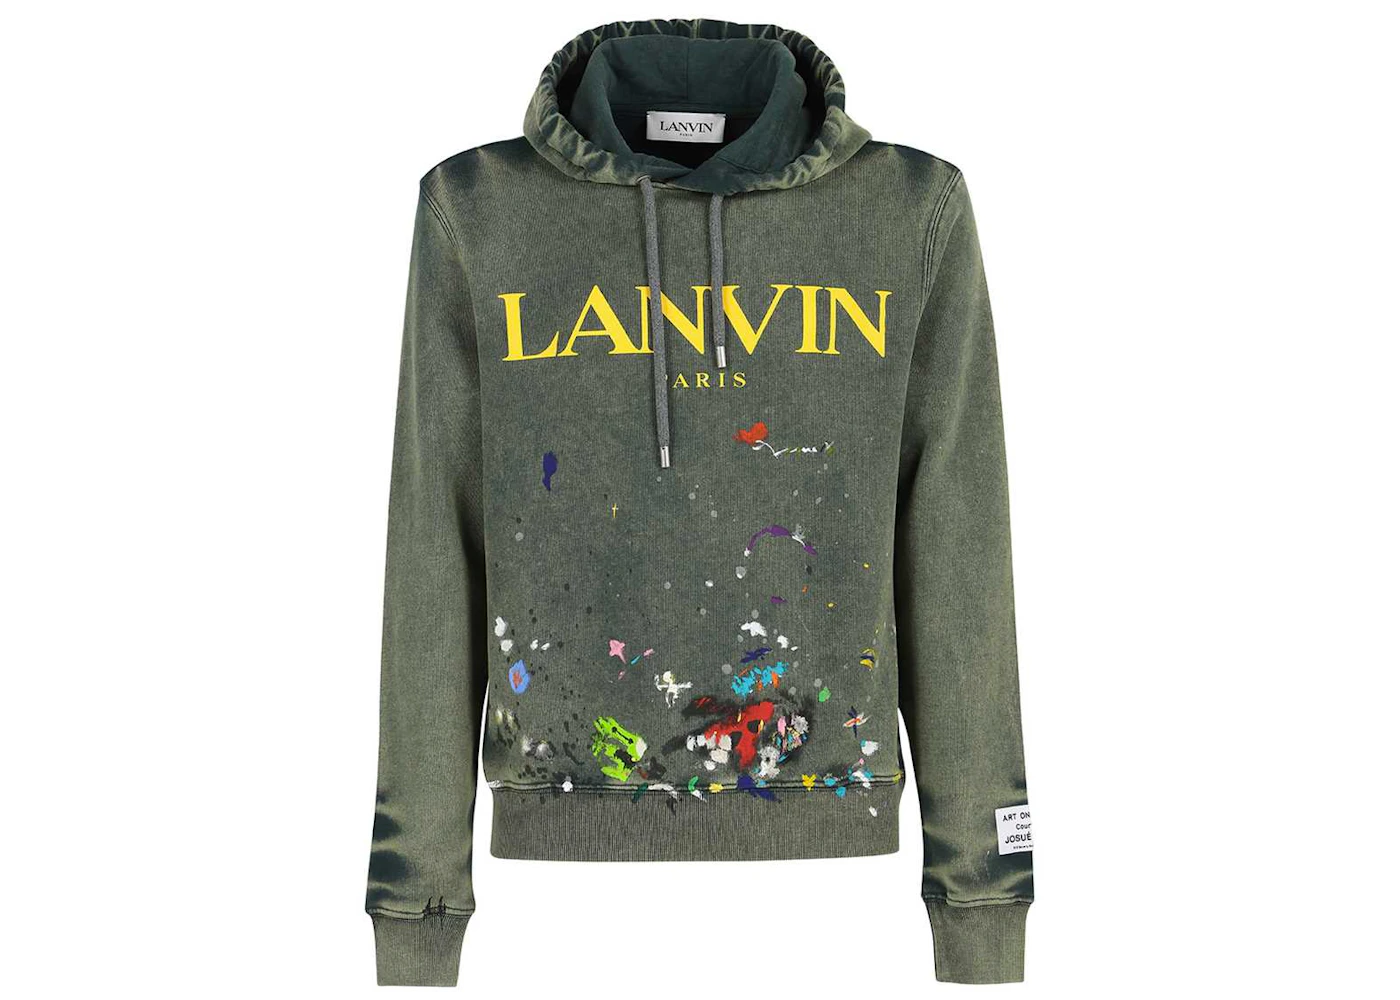 Lanvin x Gallery Dept. Logo Hoodie With A Worn Effect And Paint Marks ...